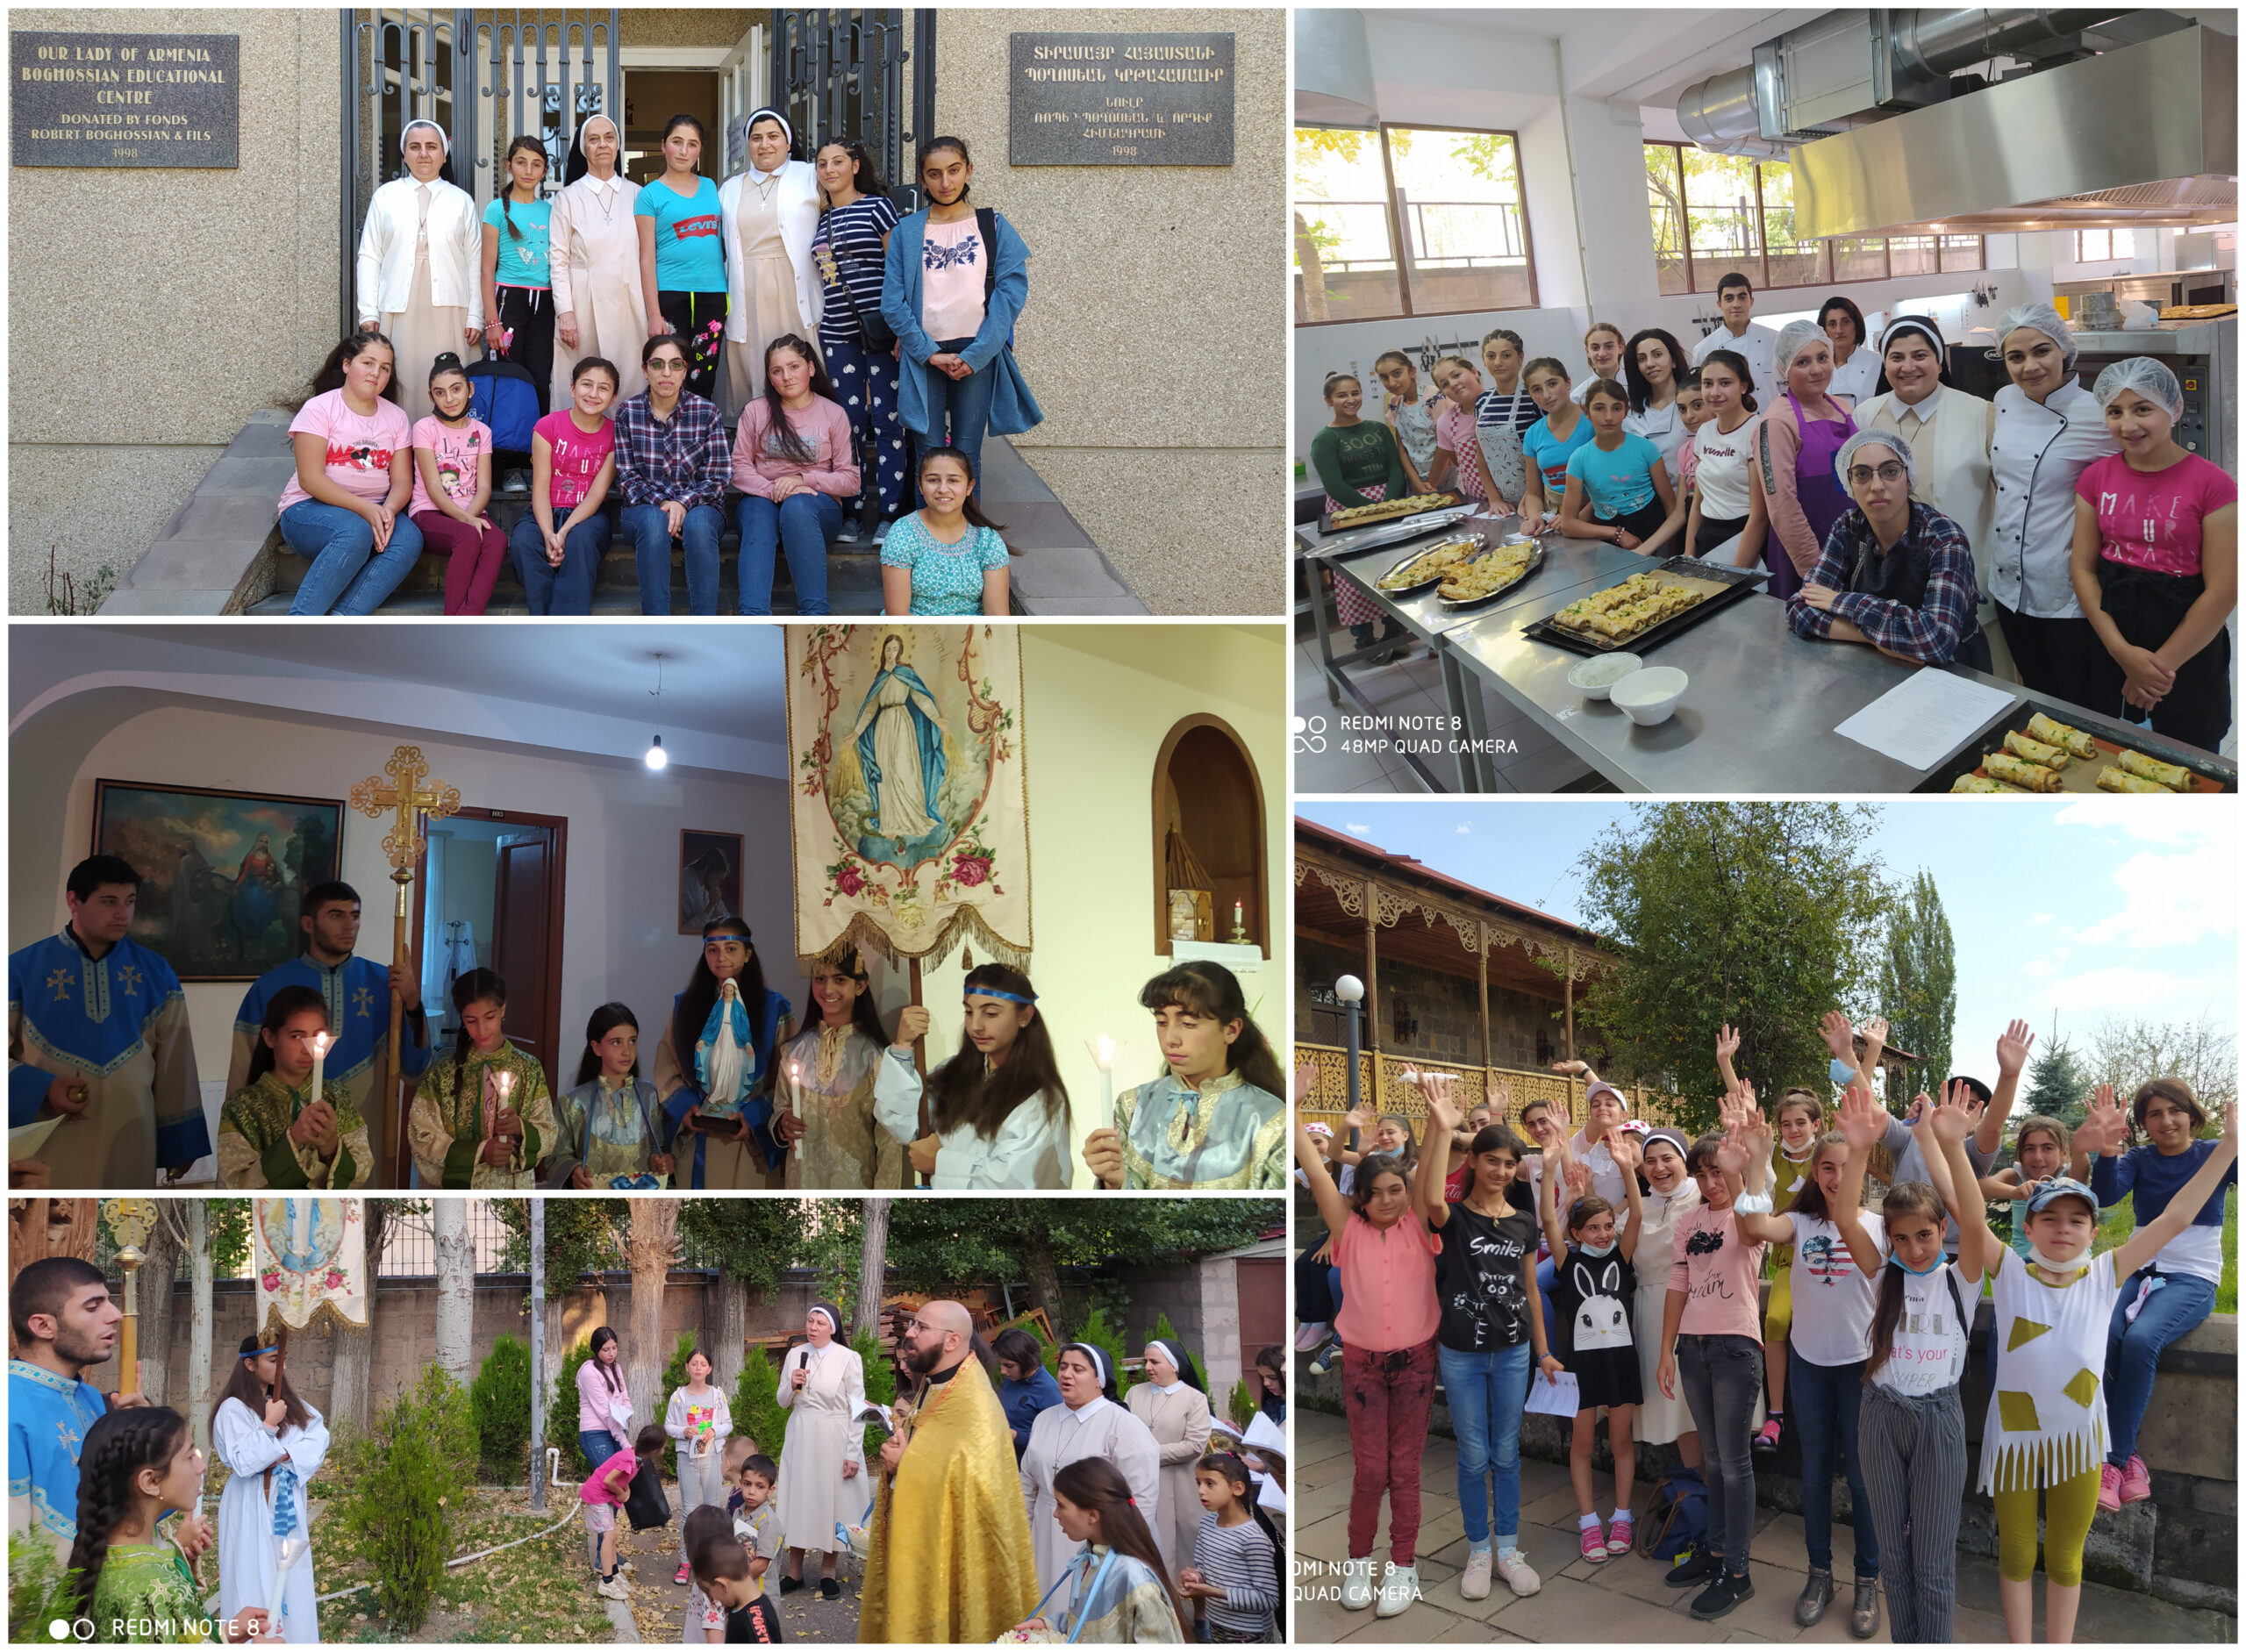 THE “COME AND SEE” PROGRAM – Our Lady Of Armenia